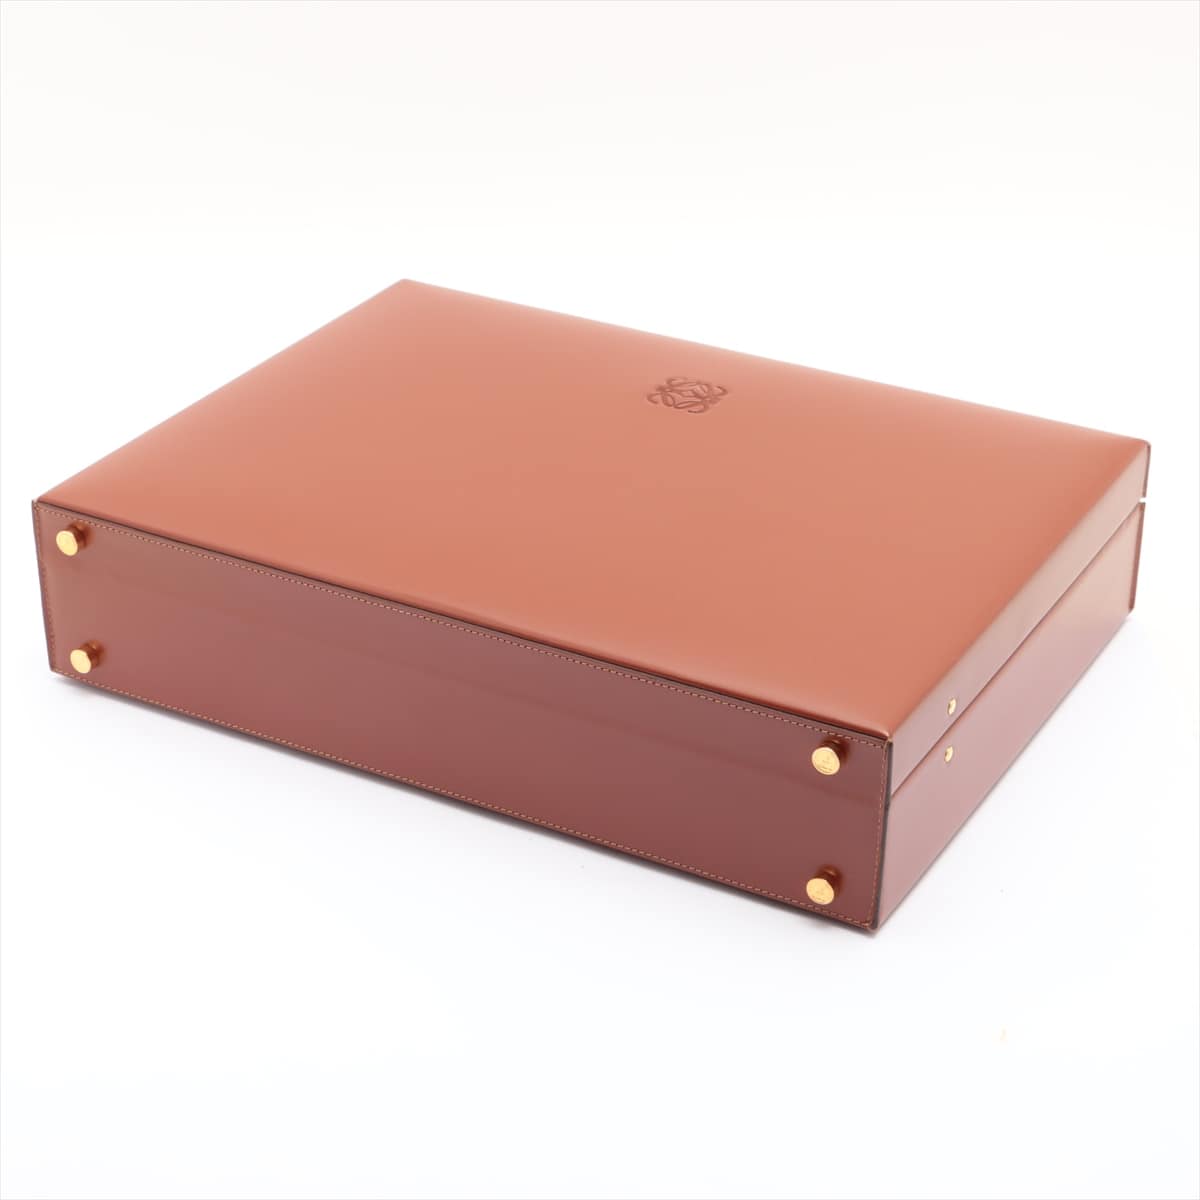 Loewe Anagram Leather Attache case Brown Setting number; left and right 000